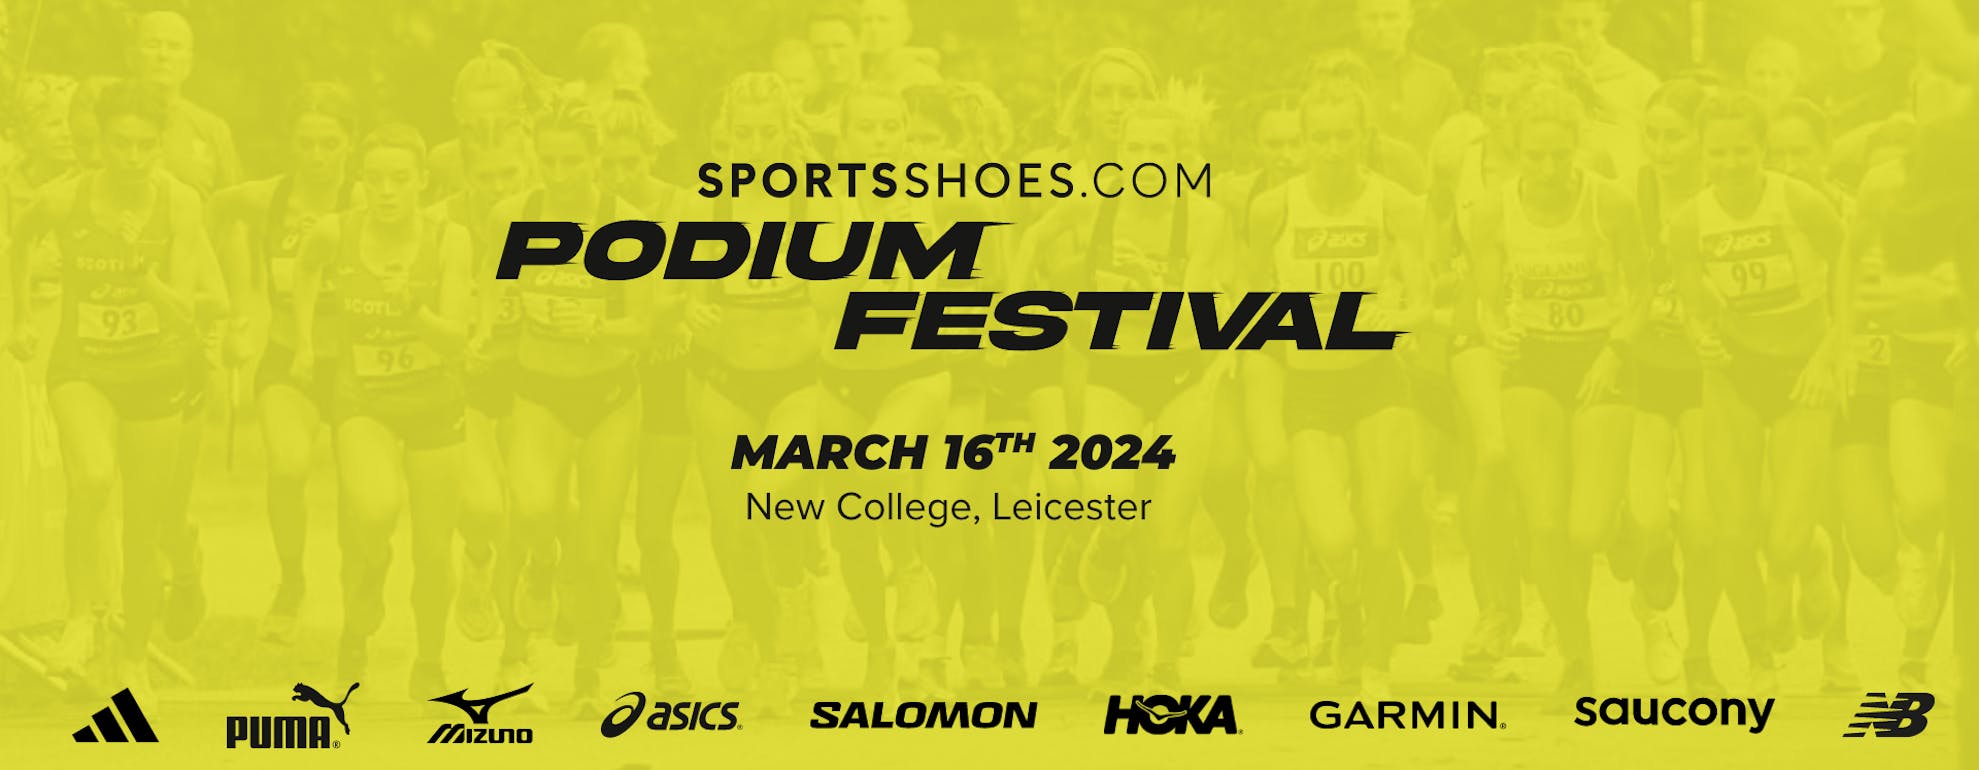 Inaugural SportsShoes Podium Festival 2024 announced in Leicester